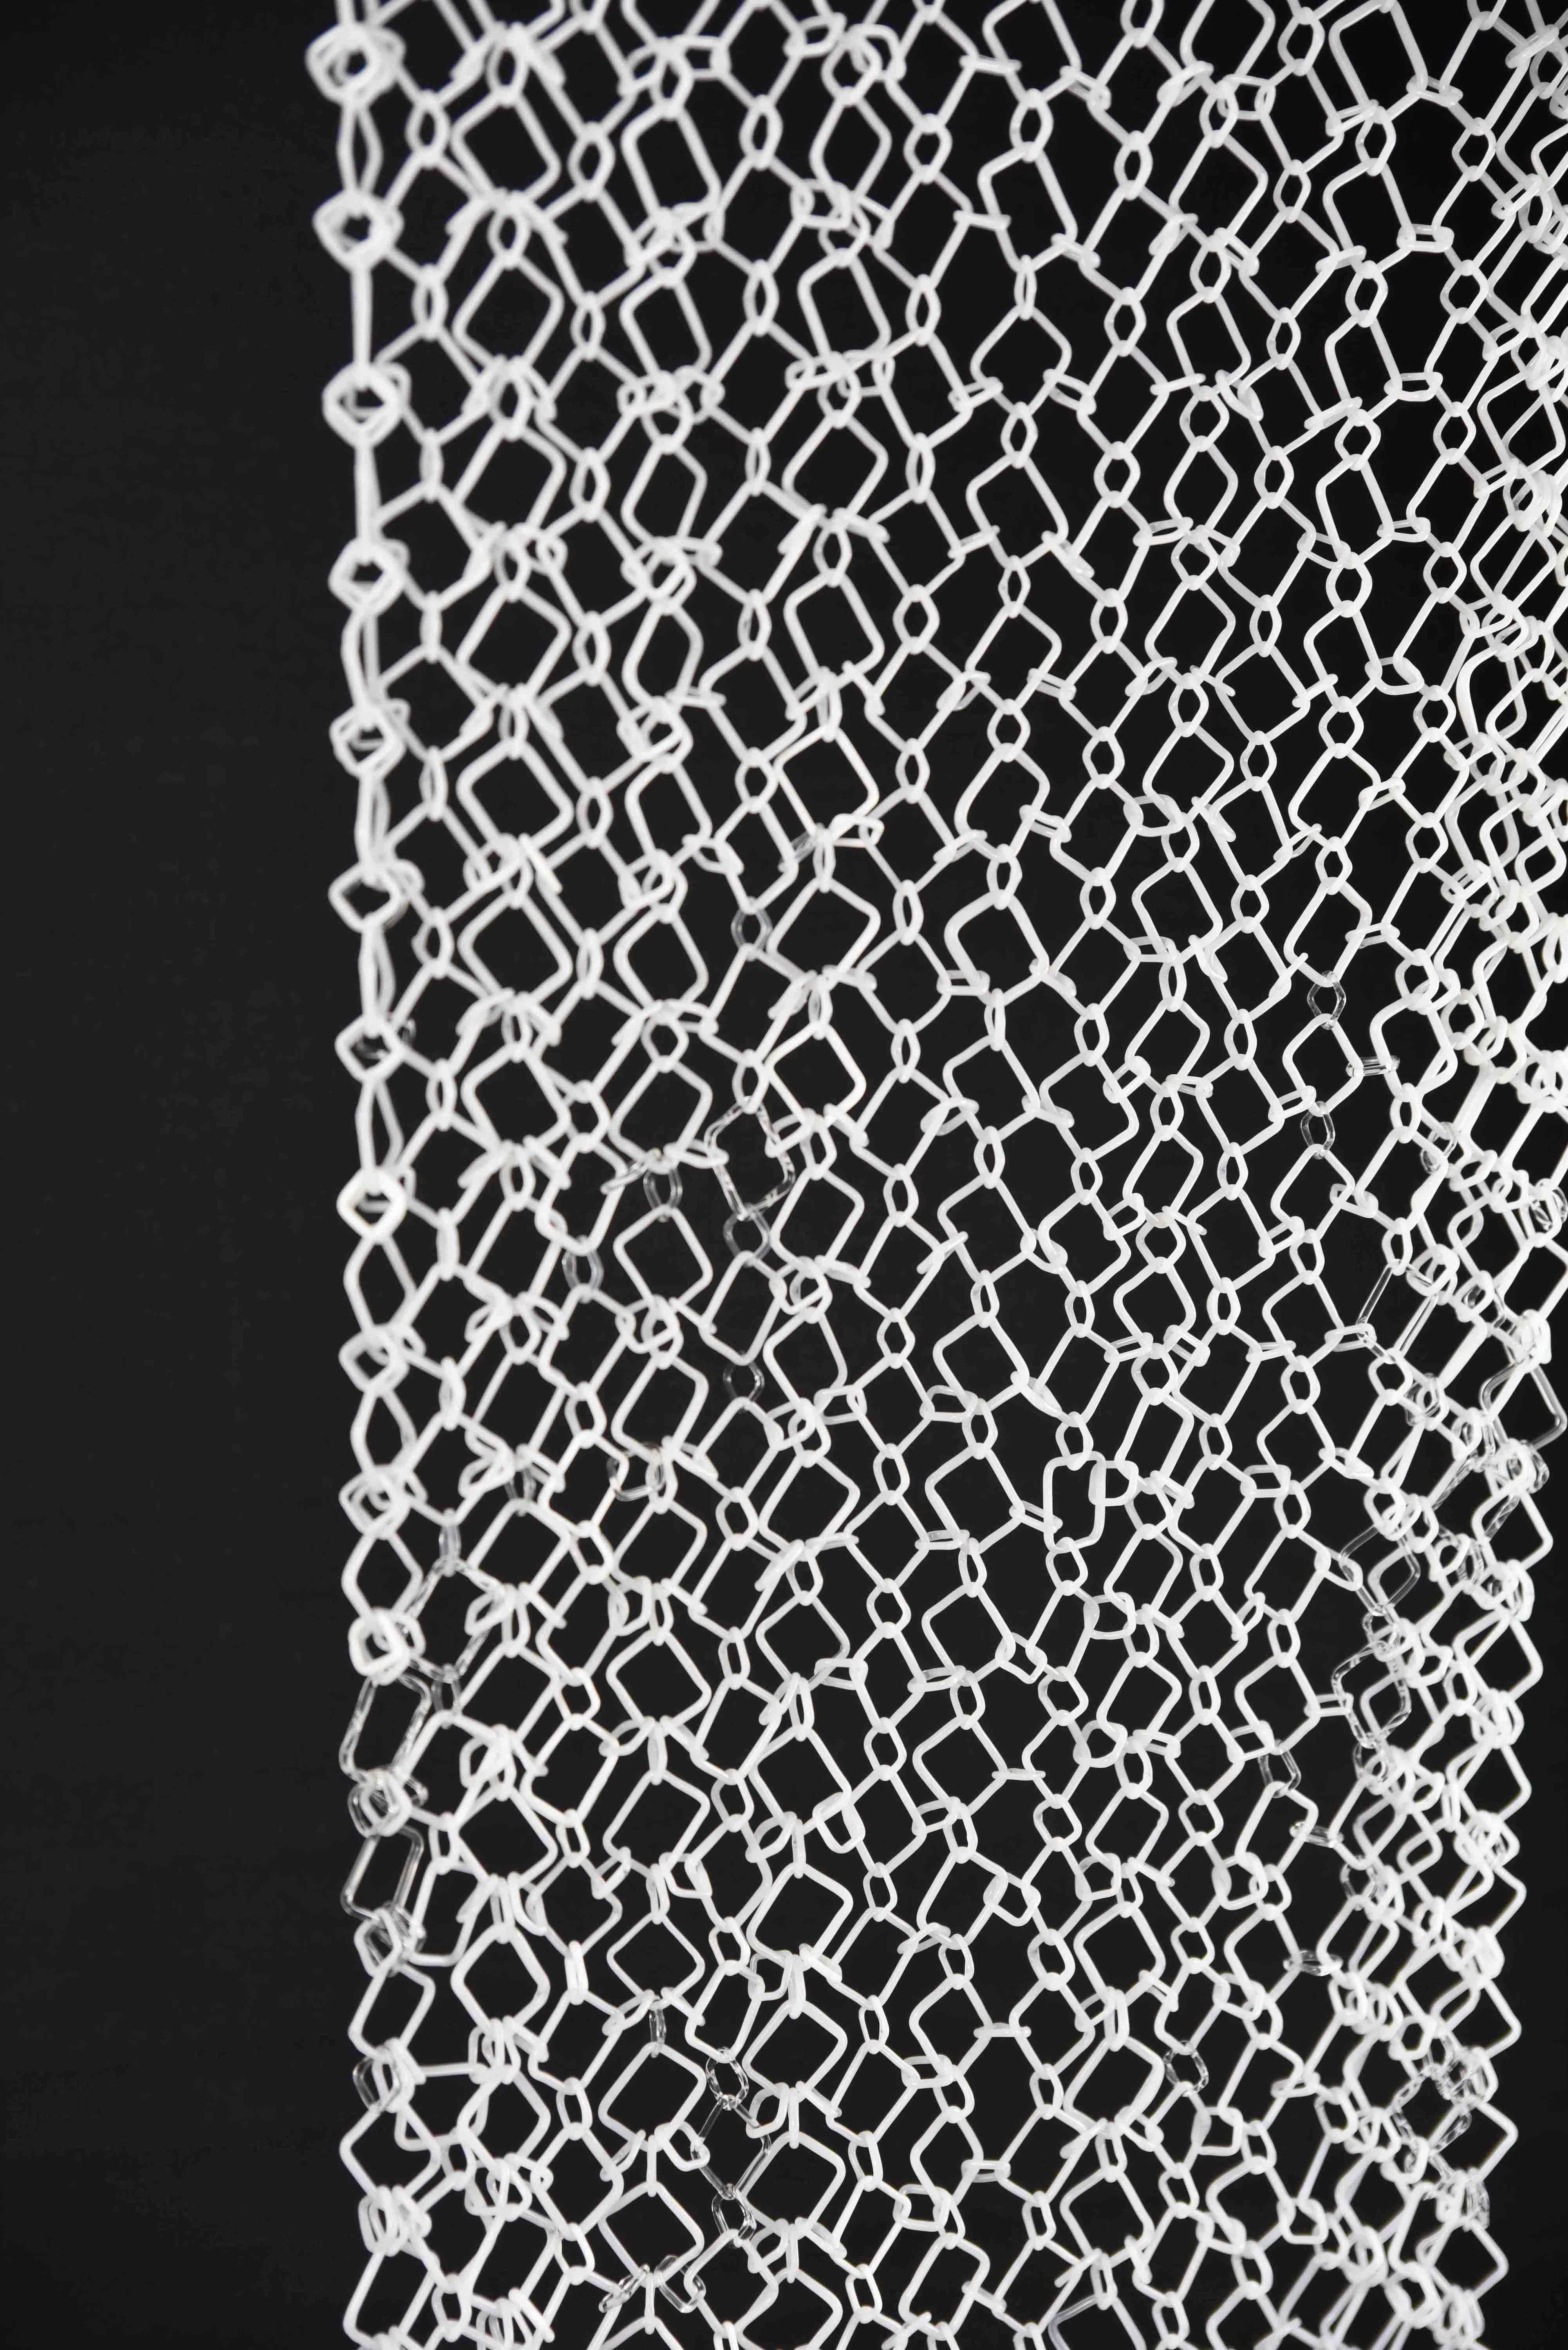 Frozen Falls, Long Hanging Sculpture of Torch-Worked Glass in Chain Maille Links - Black Abstract Sculpture by David Licata